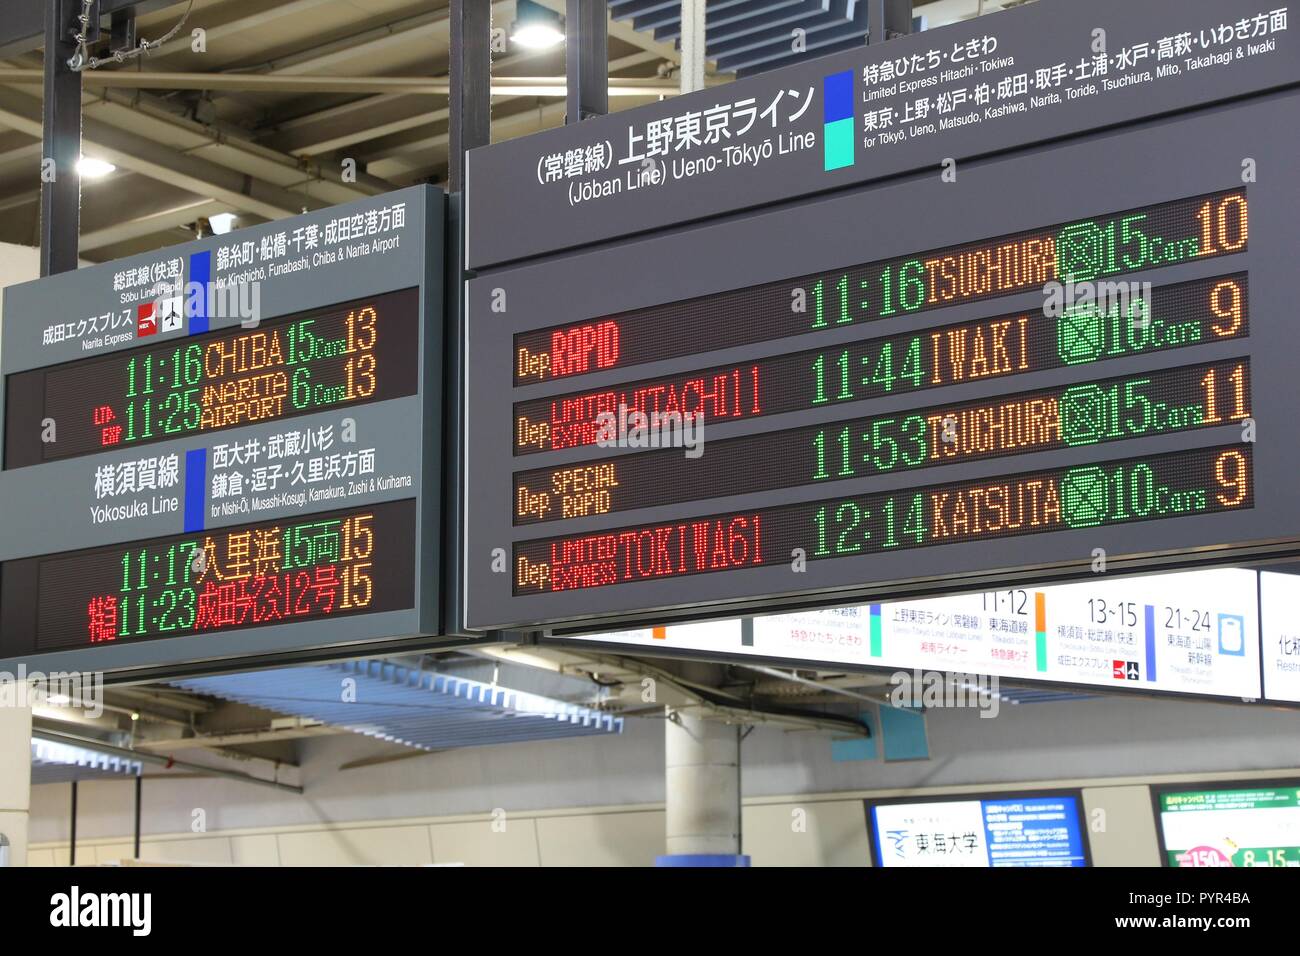 TOKYO, JAPAN - DECEMBER 3, 2016: Train timetables at Shinagawa Station in Tokyo. The station was used by 335,661 passengers daily in 2013. Stock Photo